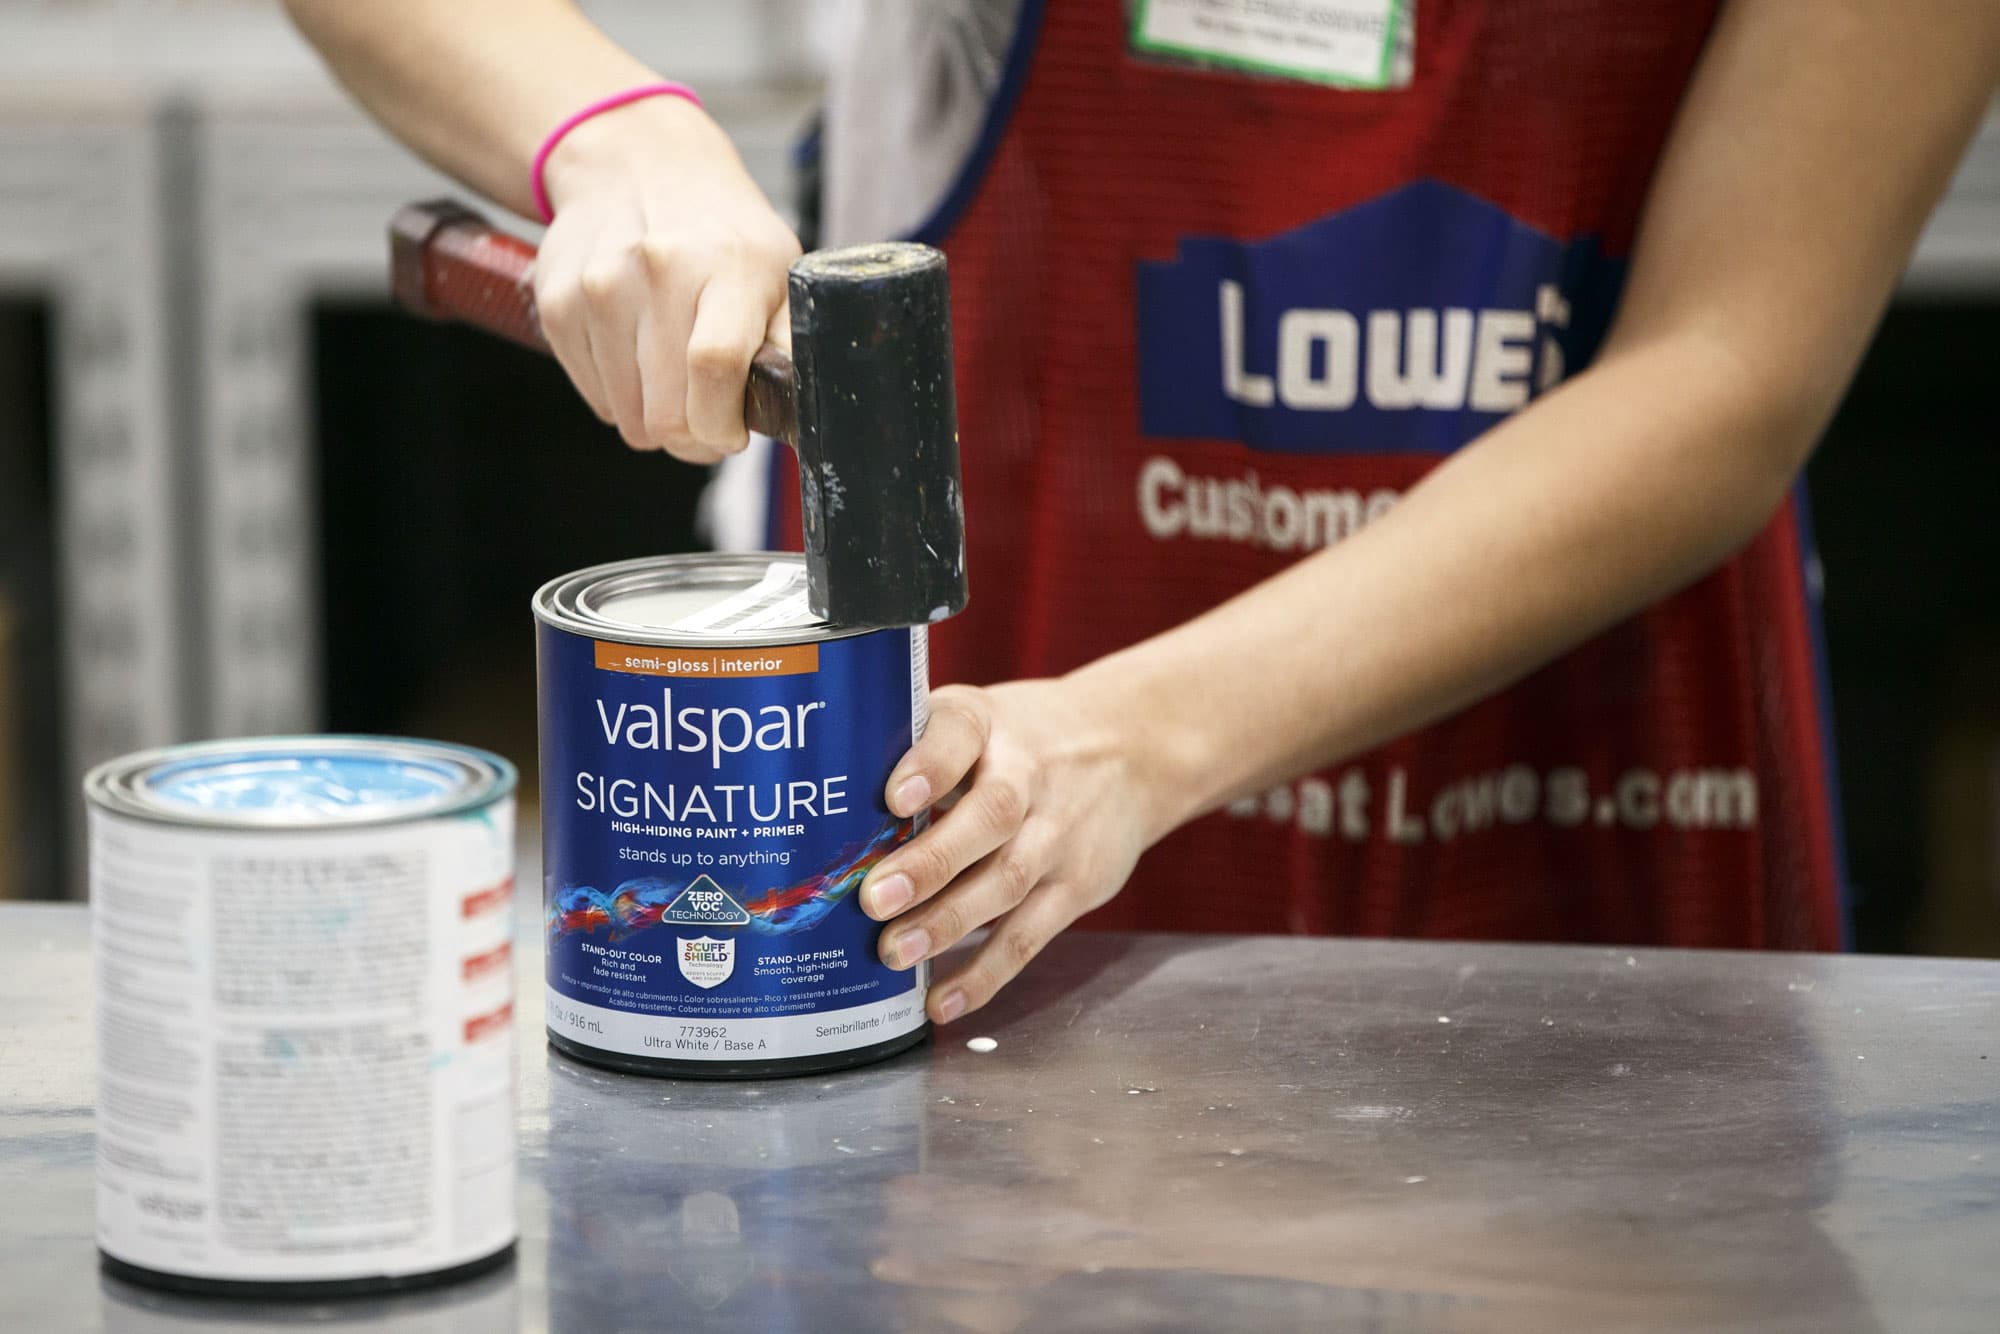 lowe-s-deepens-its-partnership-with-sherwin-williams-in-paint-aisle